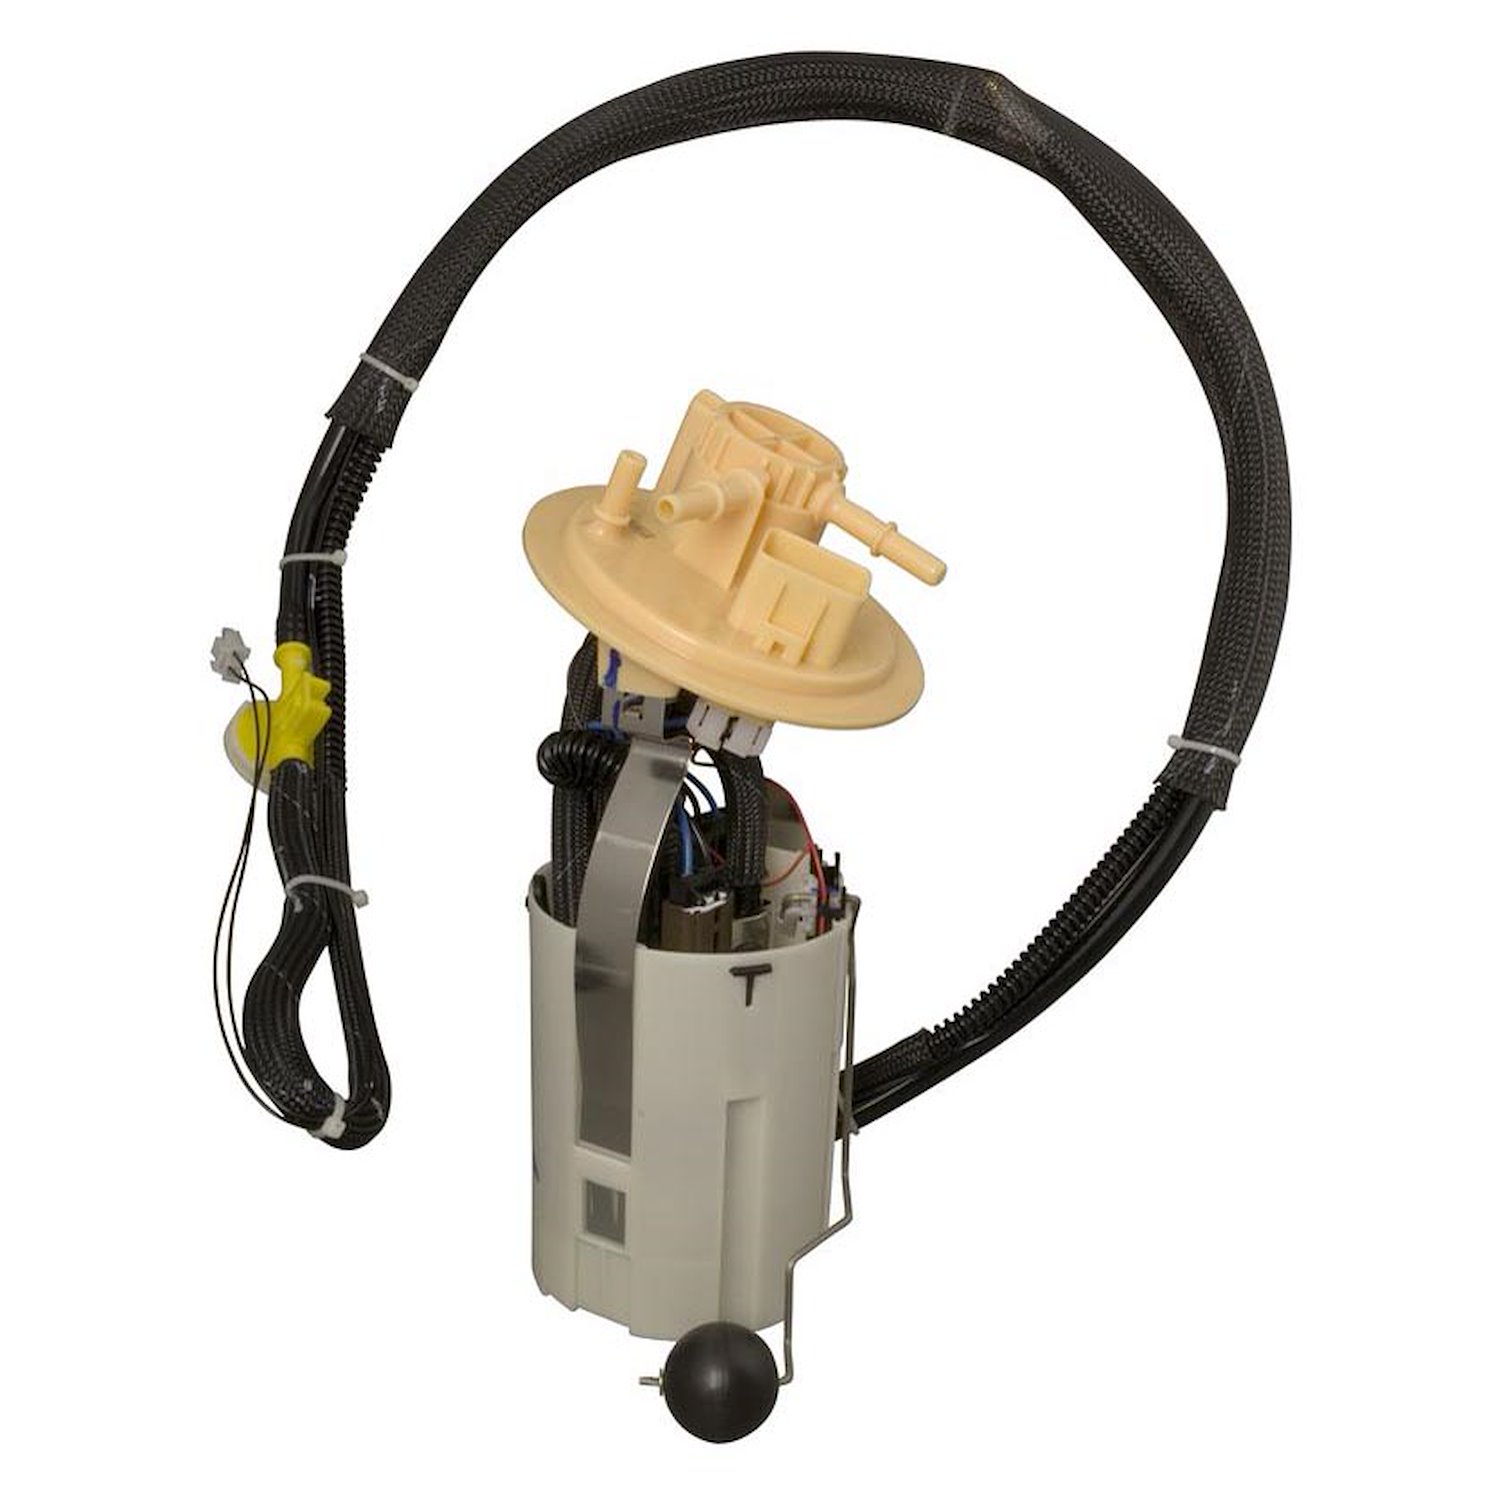 OE Replacement Electric Fuel Pump Module Assembly for